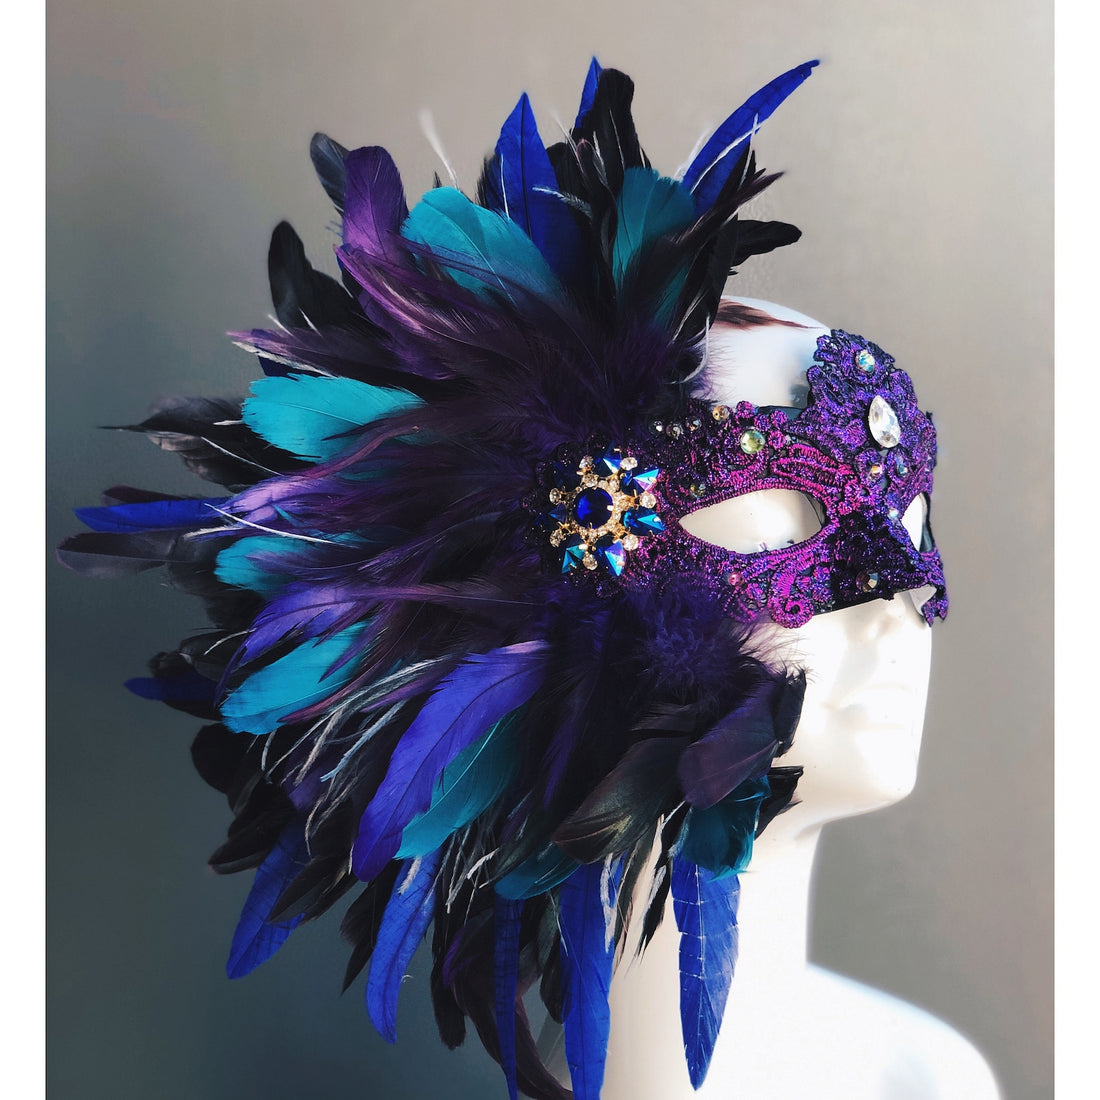 Womens feather masquerade mask with blue and purple feathers and gems, for sale.